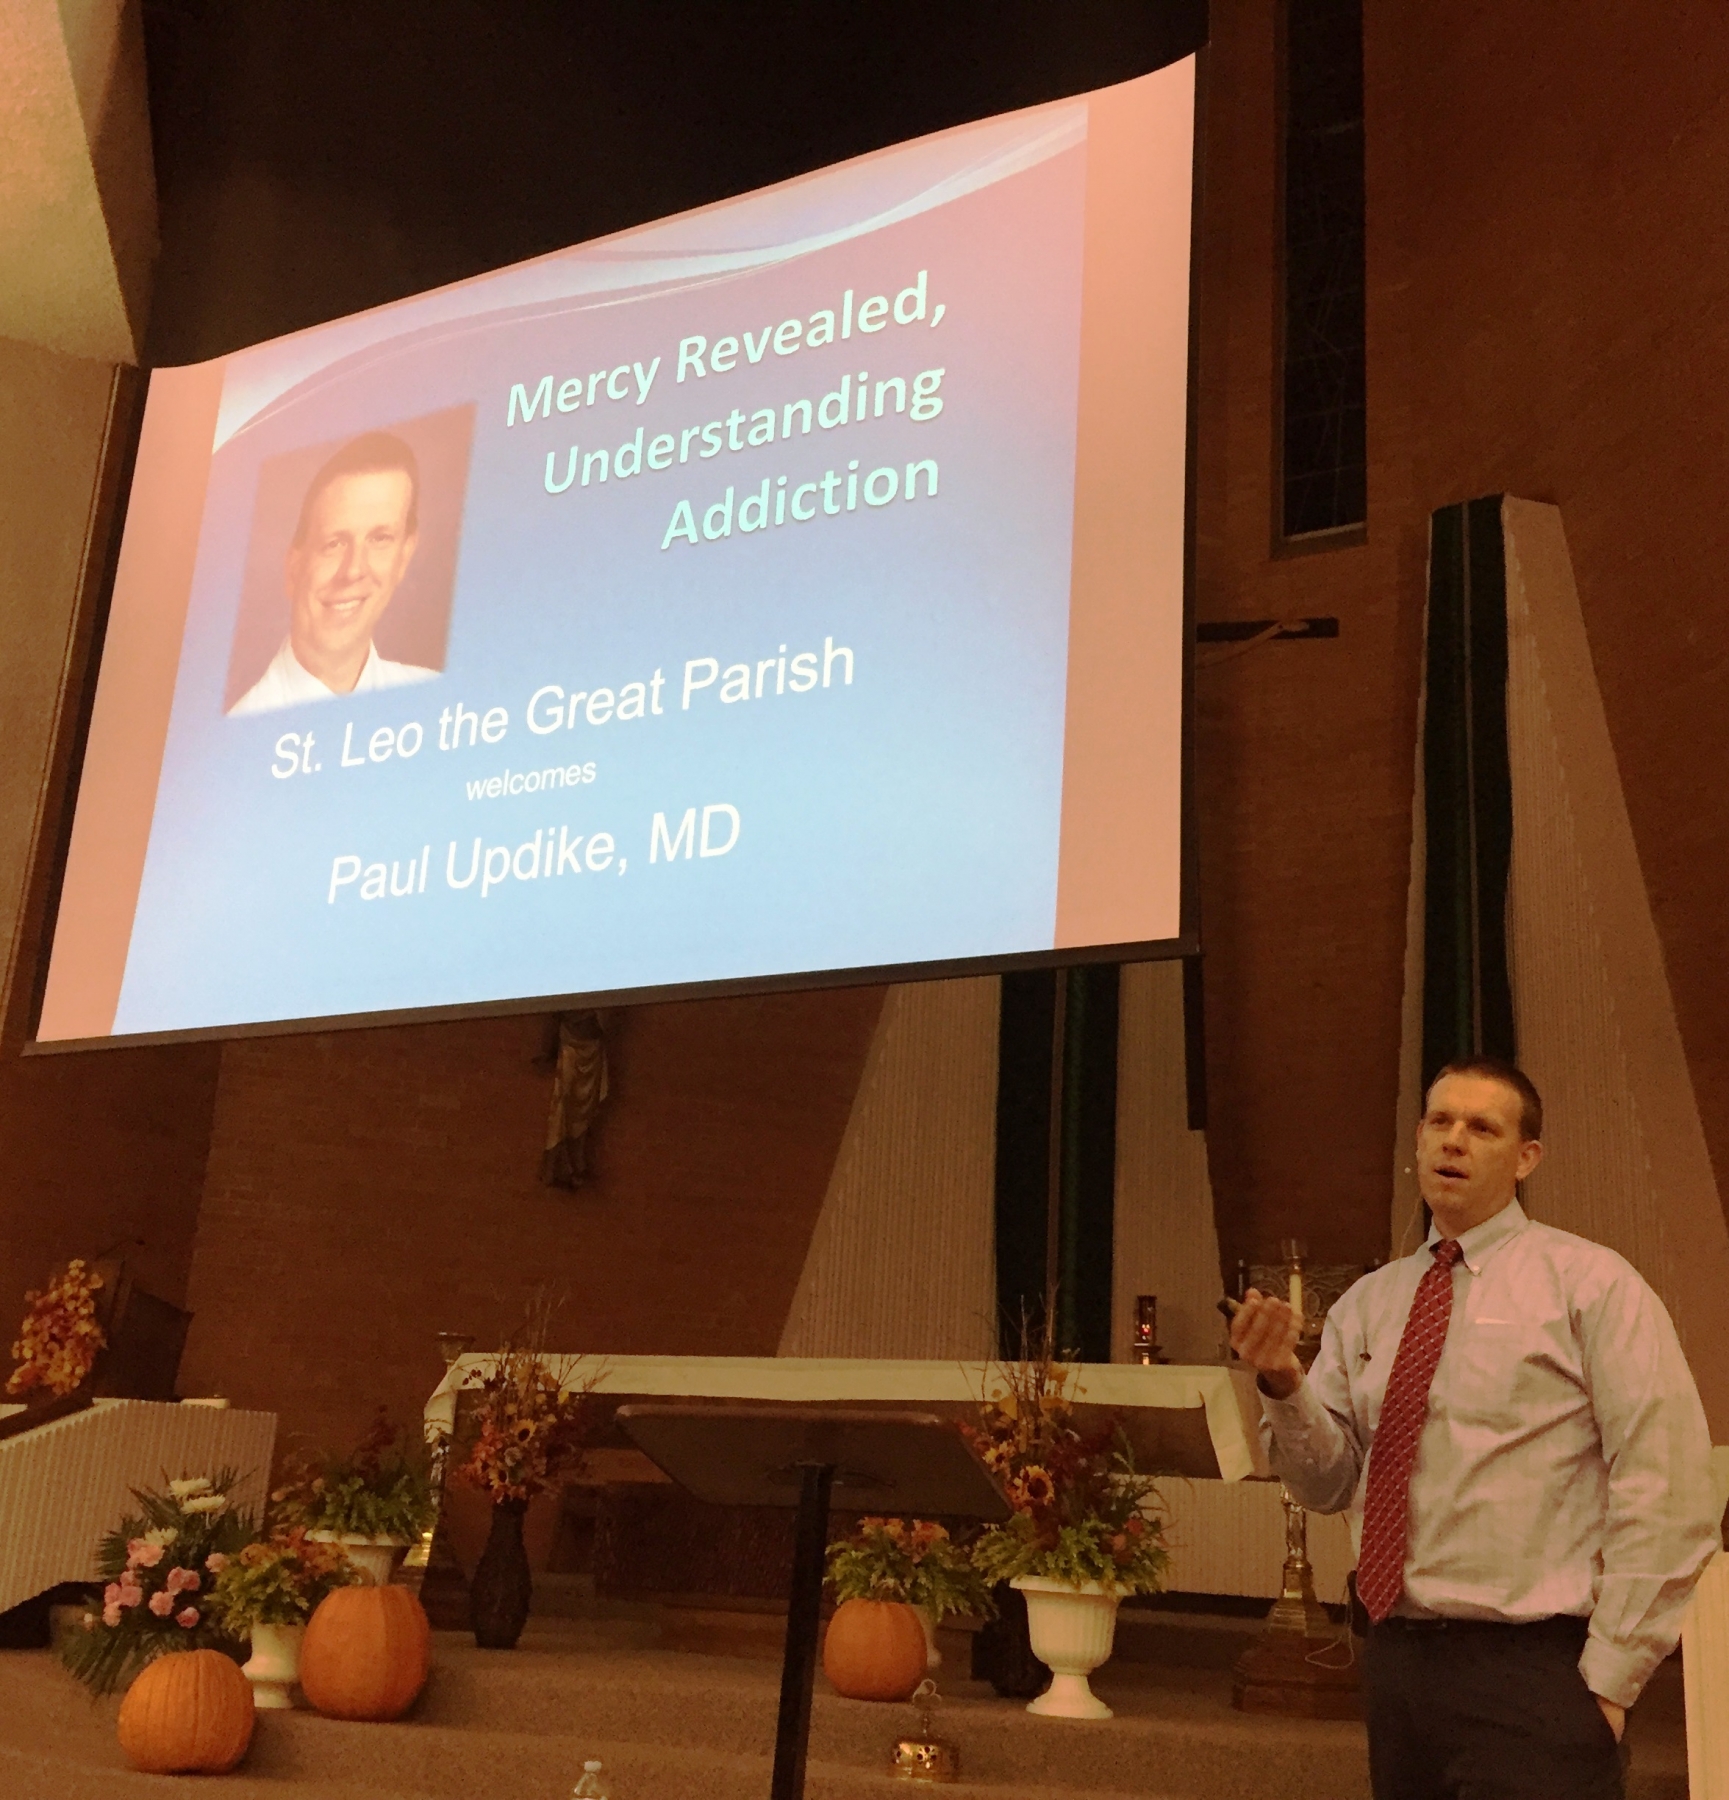 Dr. Paul Updike, director of Addiction Medicine and Recovery Services for Catholic Health System, speaks to a crowd at St. Leo the Great Church on November 15, 2016.